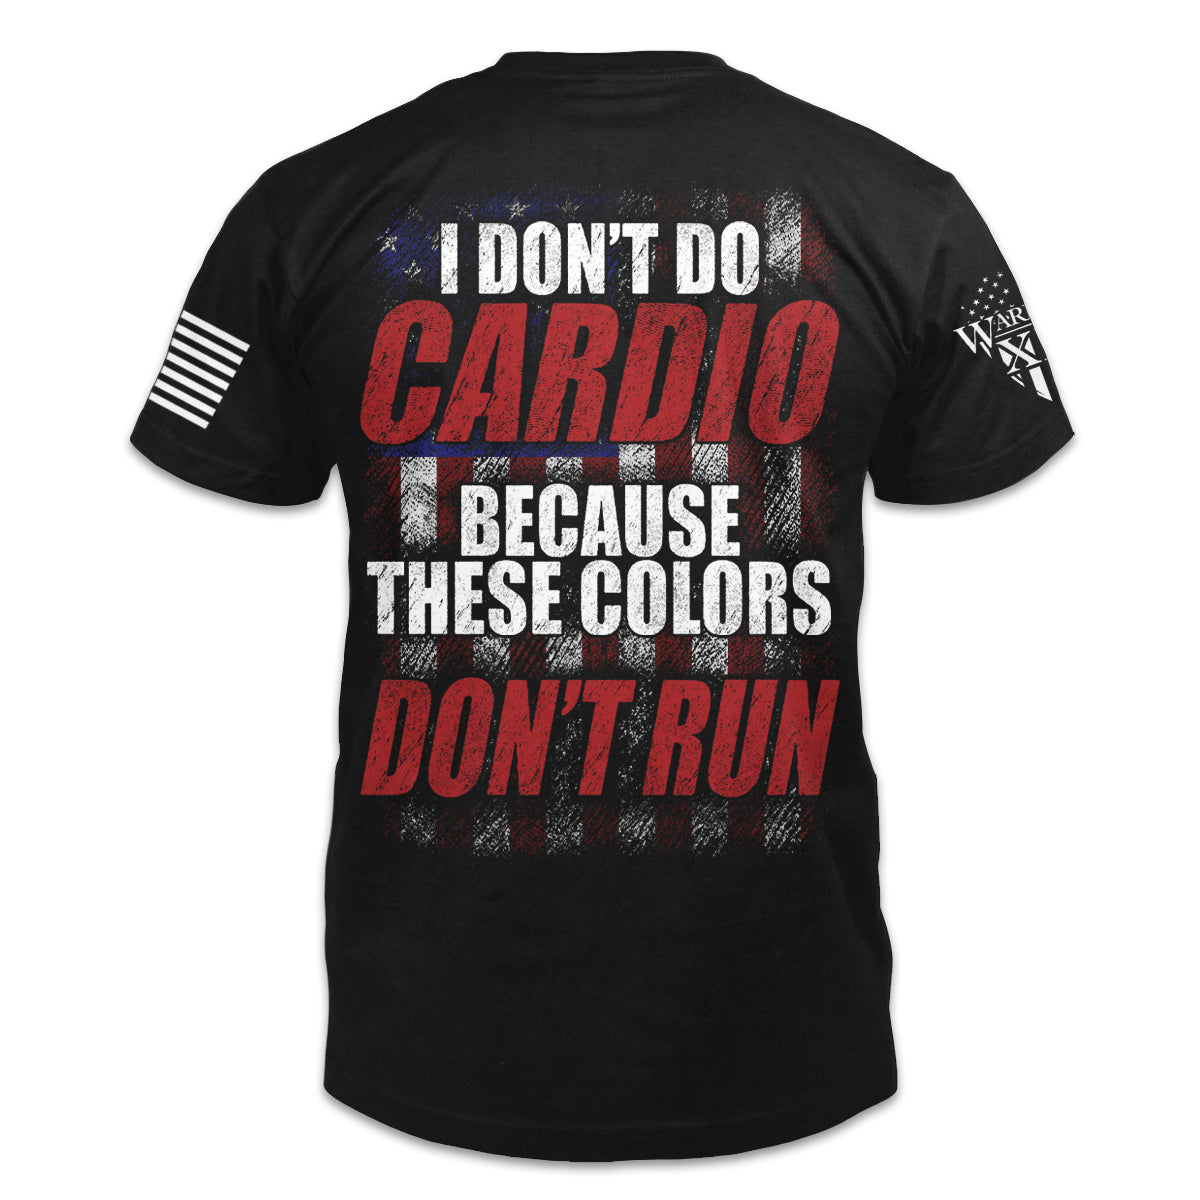 The back of a black t shirt with the words "I don't do cardio because these colors don't run" on the back over a vertical U S Flag.